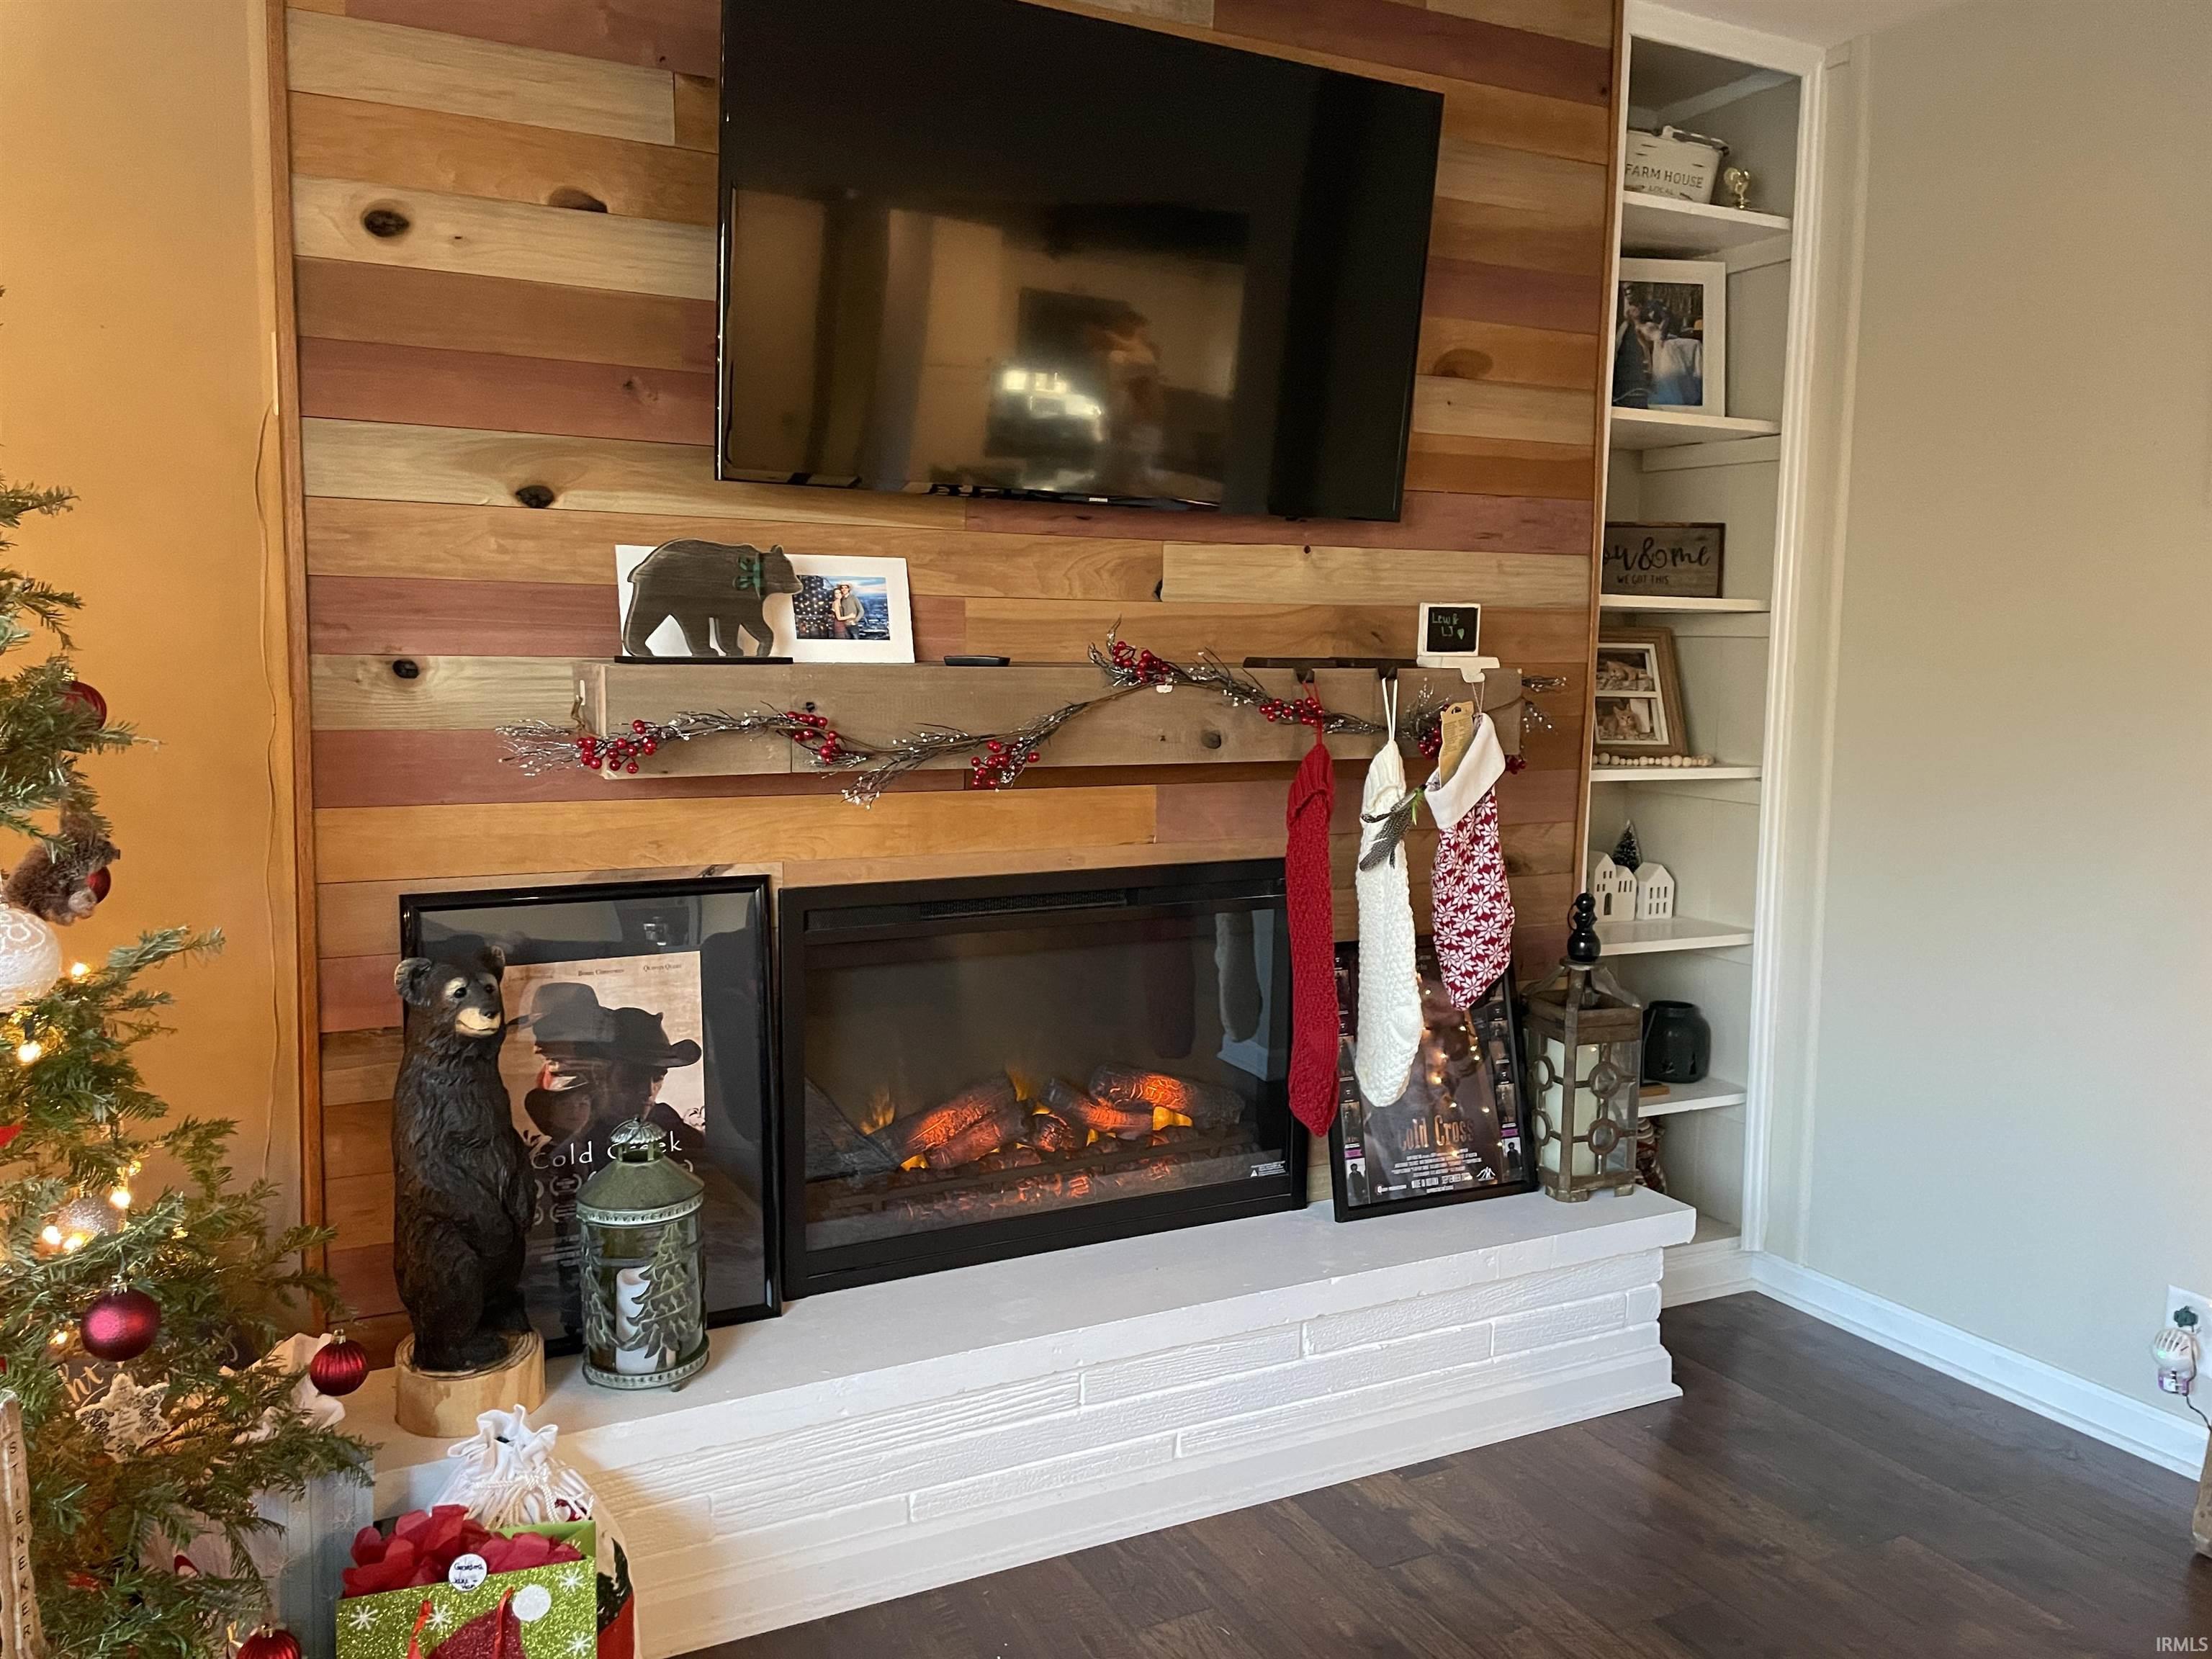 new fireplace in LR